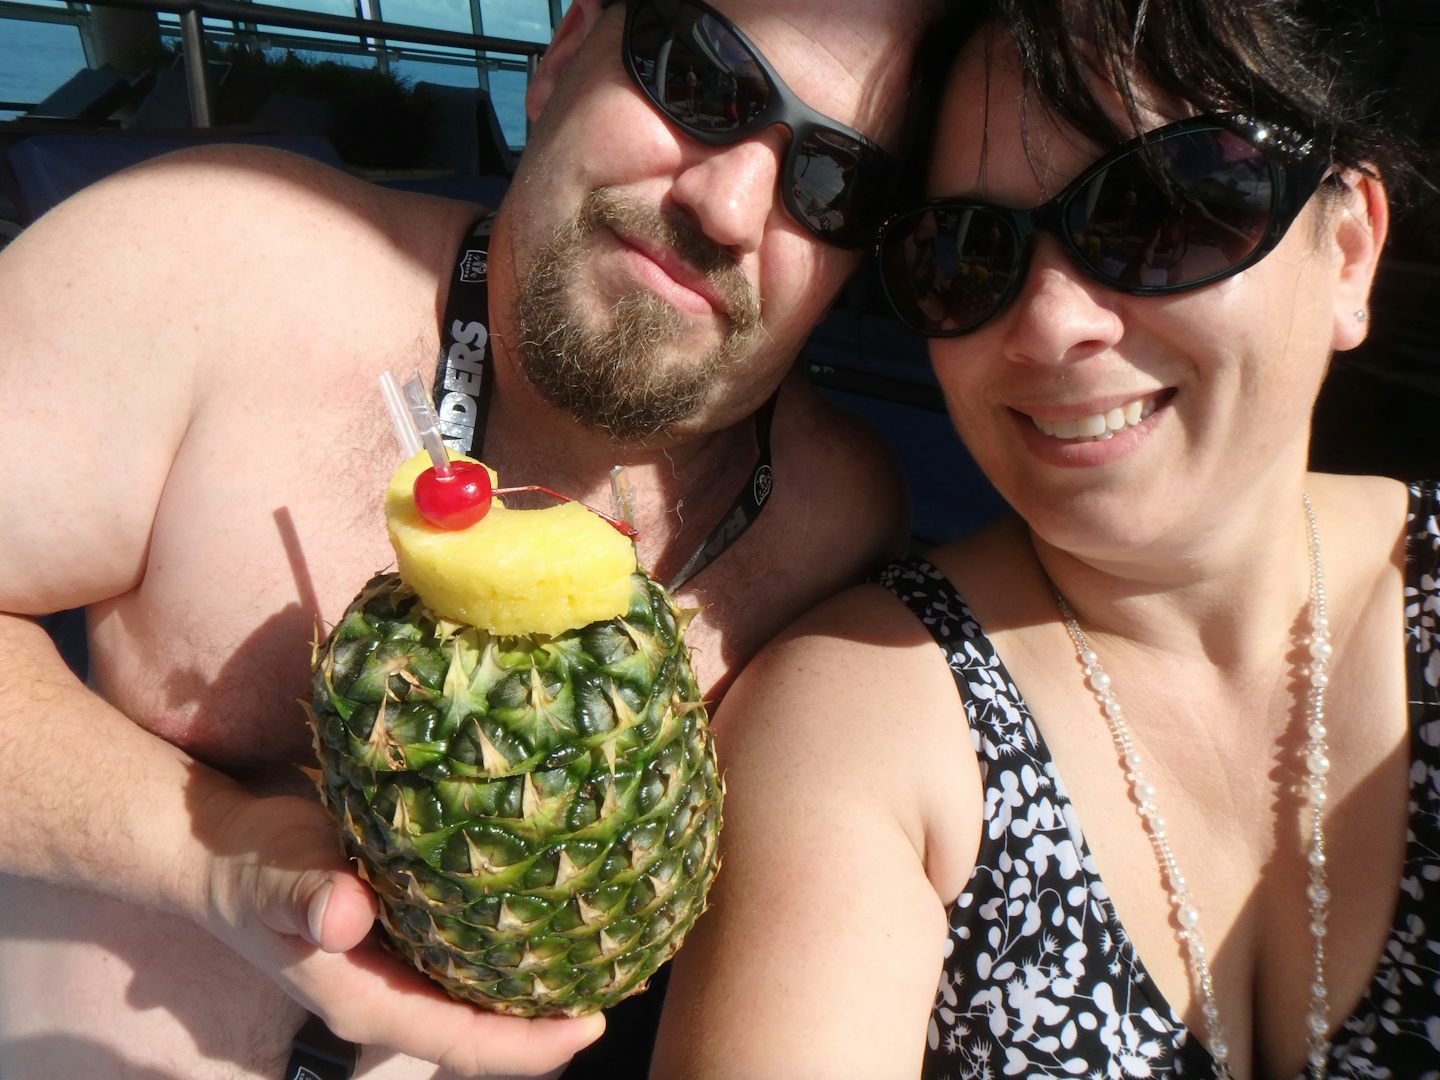 First day on the cruise - tropical dring